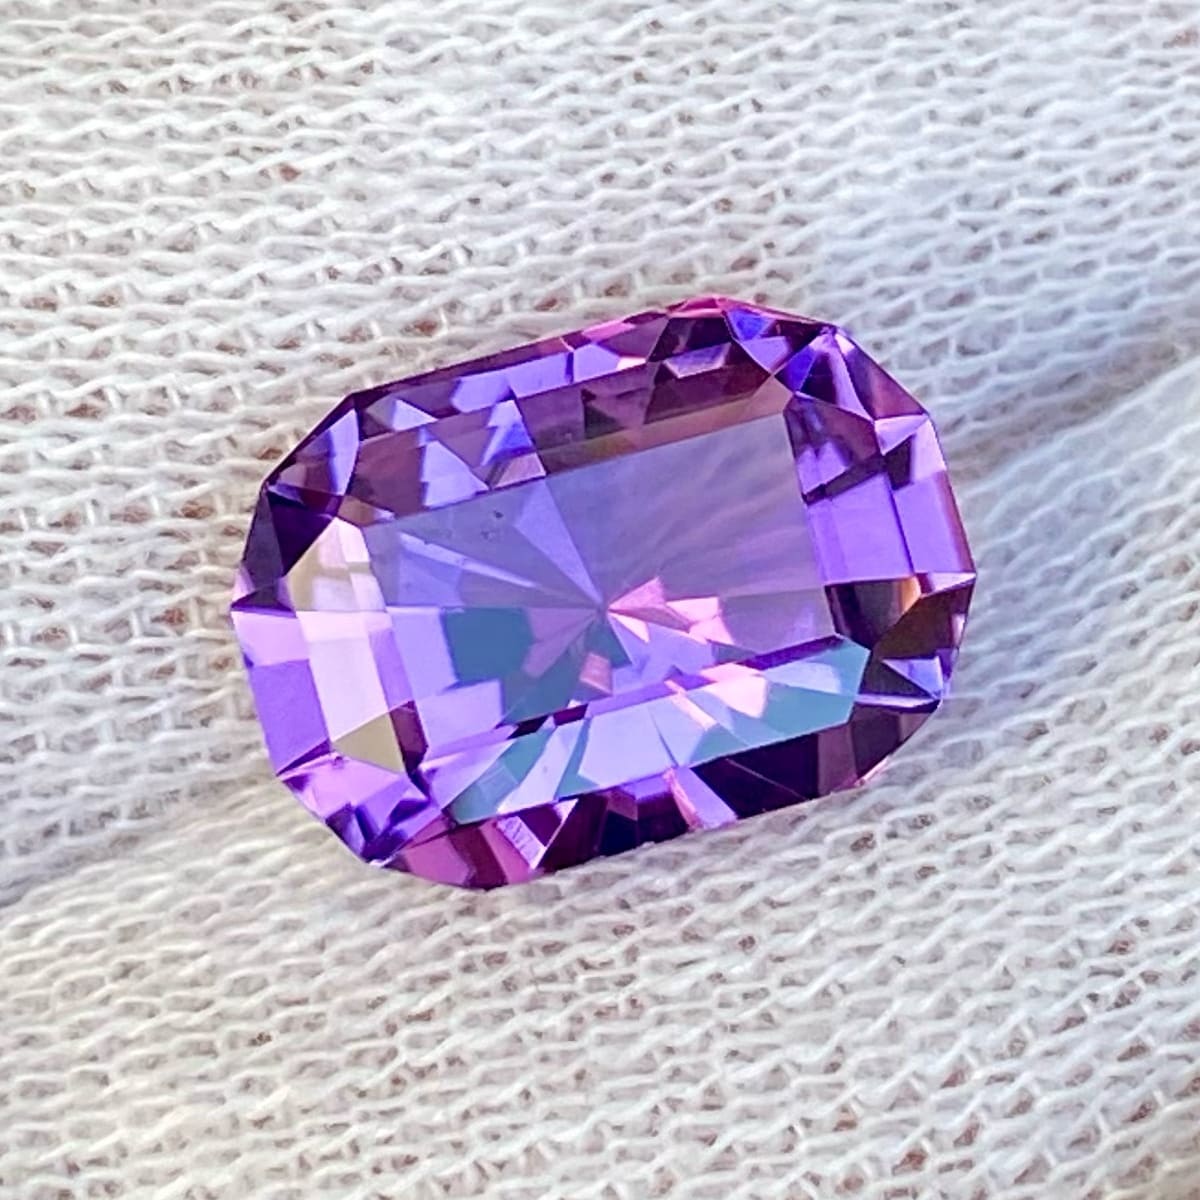 Beautifully Faceted Amethyst